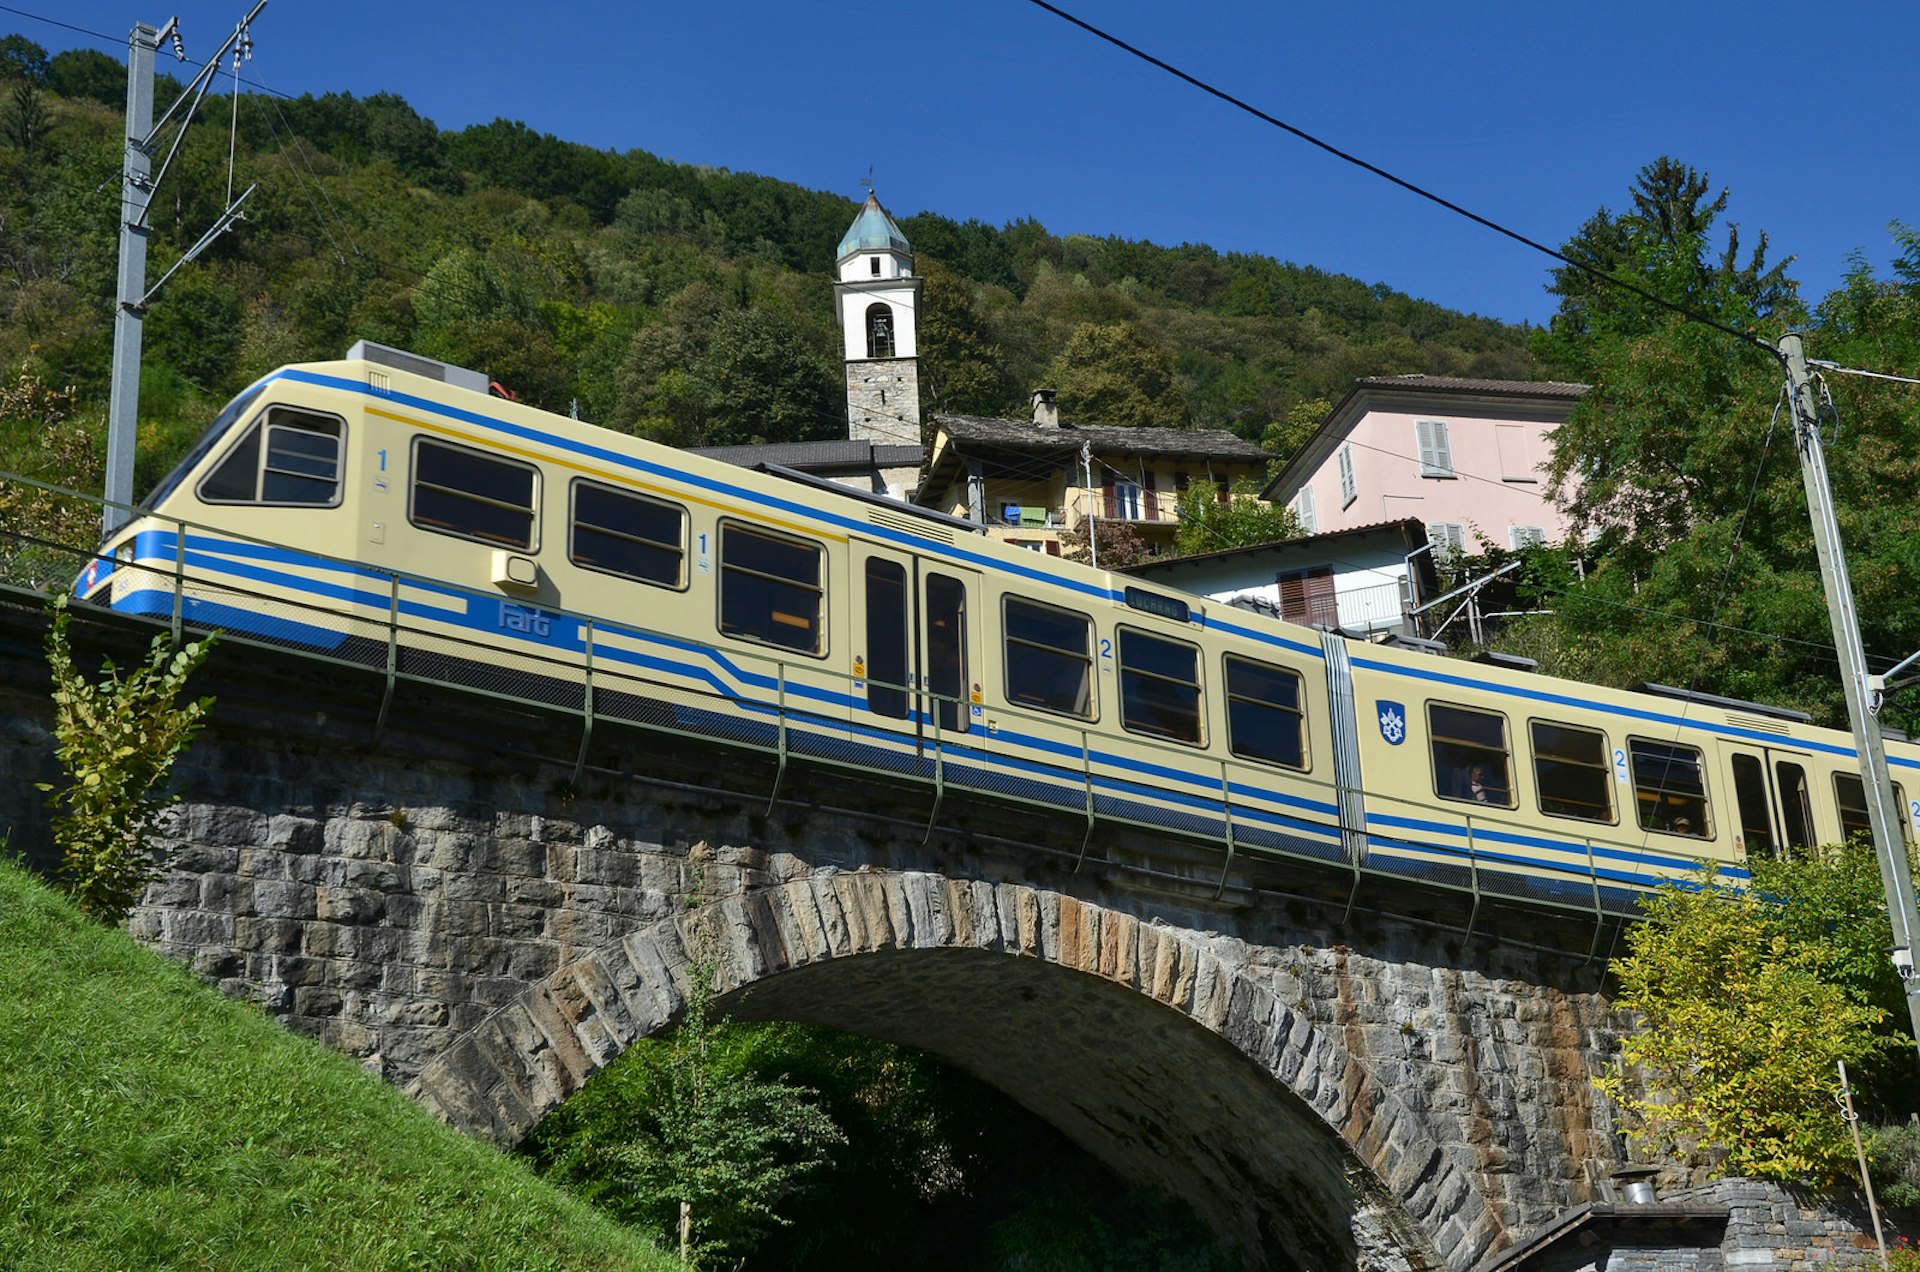 The Centovalli line passes through some pretty spectacular scenery